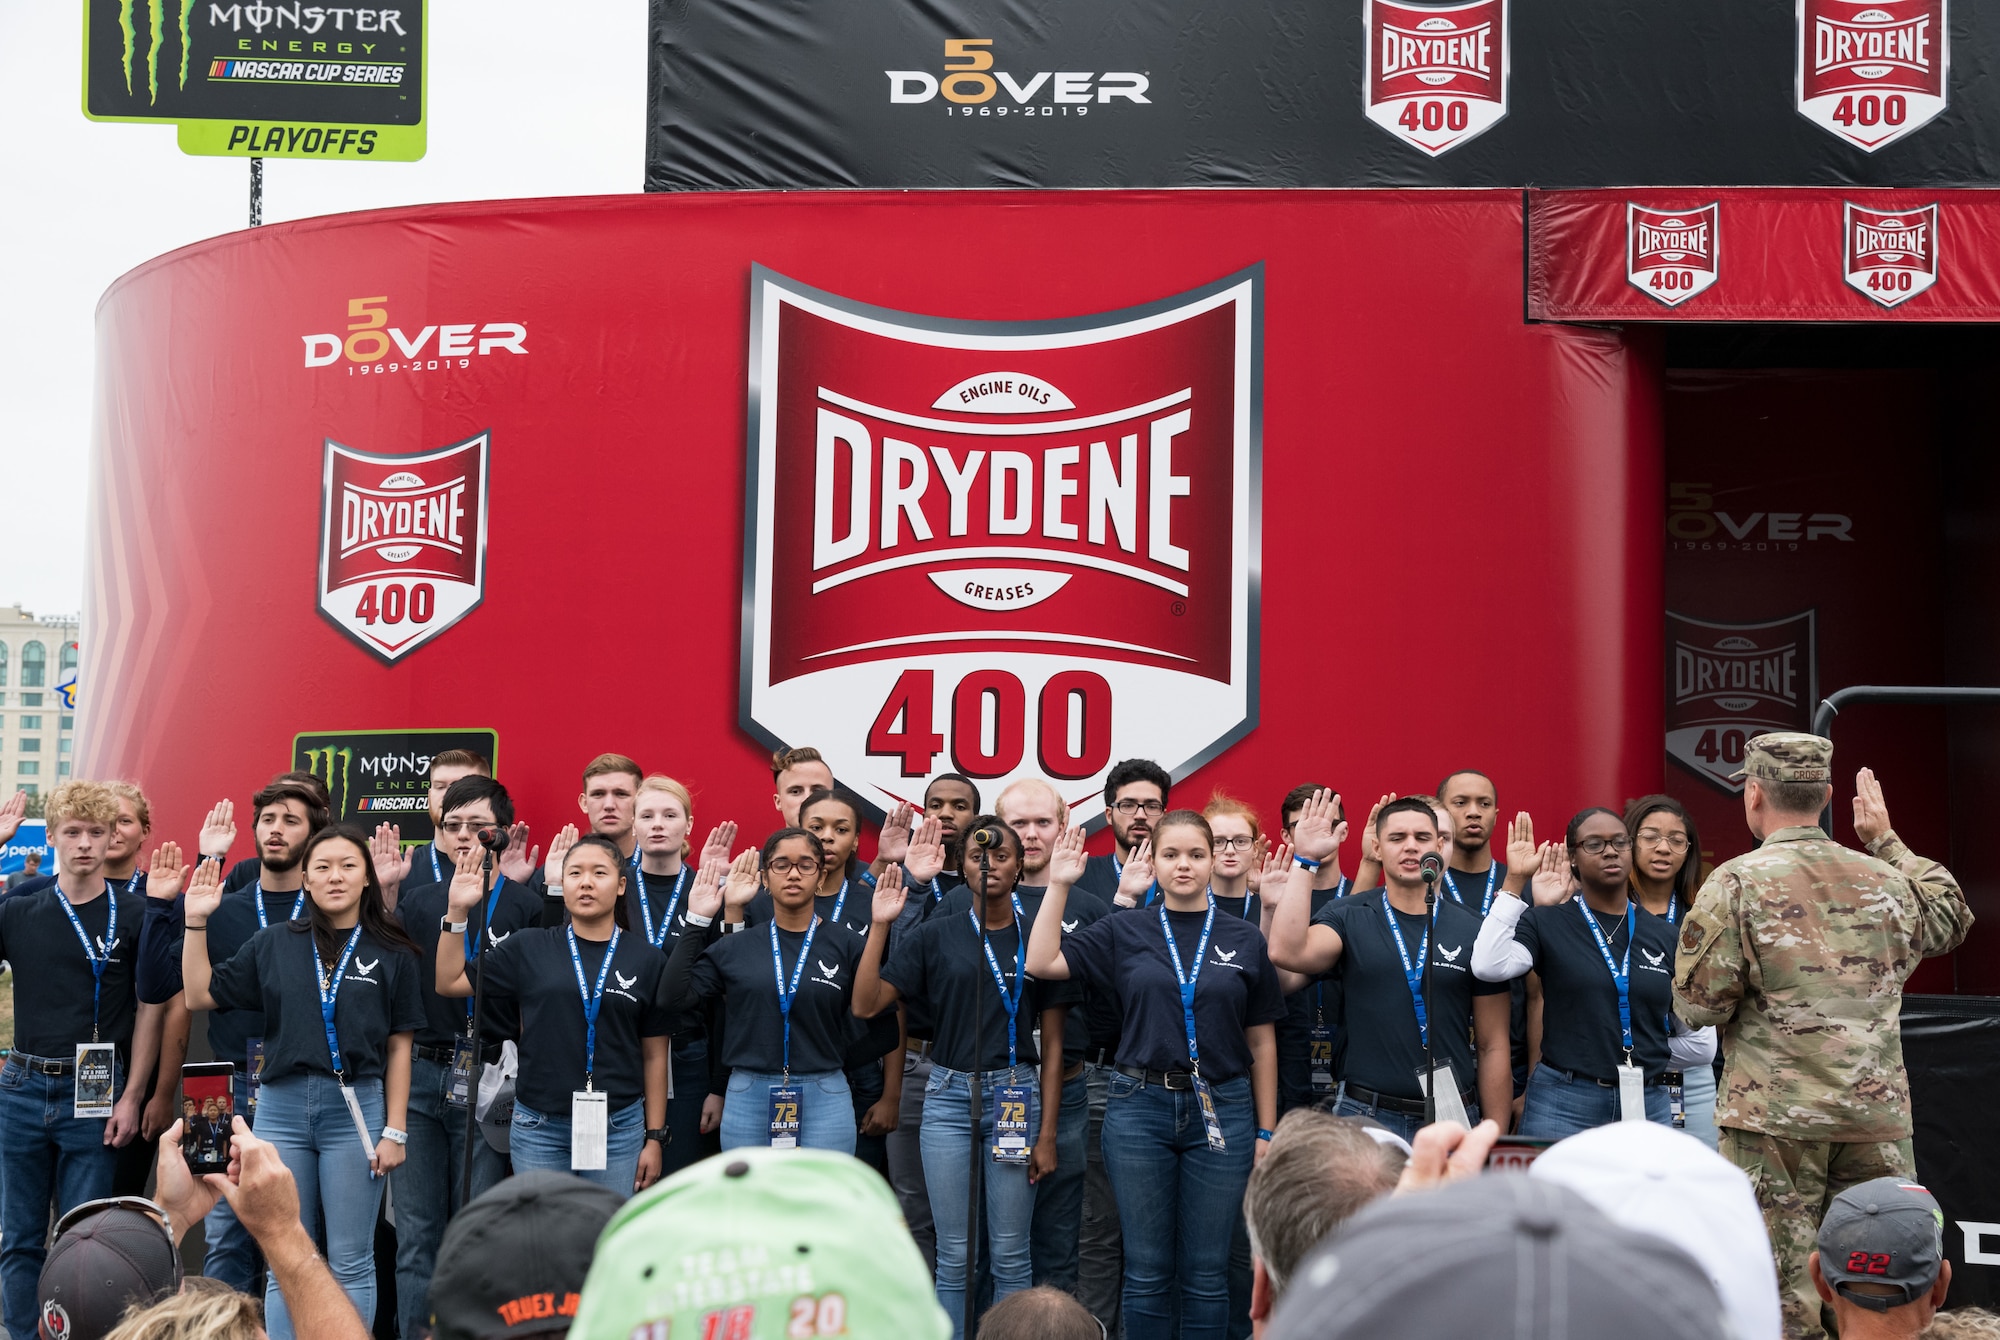 Maj. Gen. Clinton Crosier, assigned to the Deputy Chief of Staff for Strategy, Integration and Requirements, Headquarters U.S. Air Force, Arlington, Va., administers the oath of enlistment to 26 U.S. Air Force recruits entering the Delayed Entry Program Oct. 6, 2019, at Dover International Speedway, Dover, Del. Crosier administered the oath of enlistment to the recruits prior to the start of the "Drydene 400" Monster Energy NASCAR Cup Series playoff race. (U.S. Air Force photo by Roland Balik)